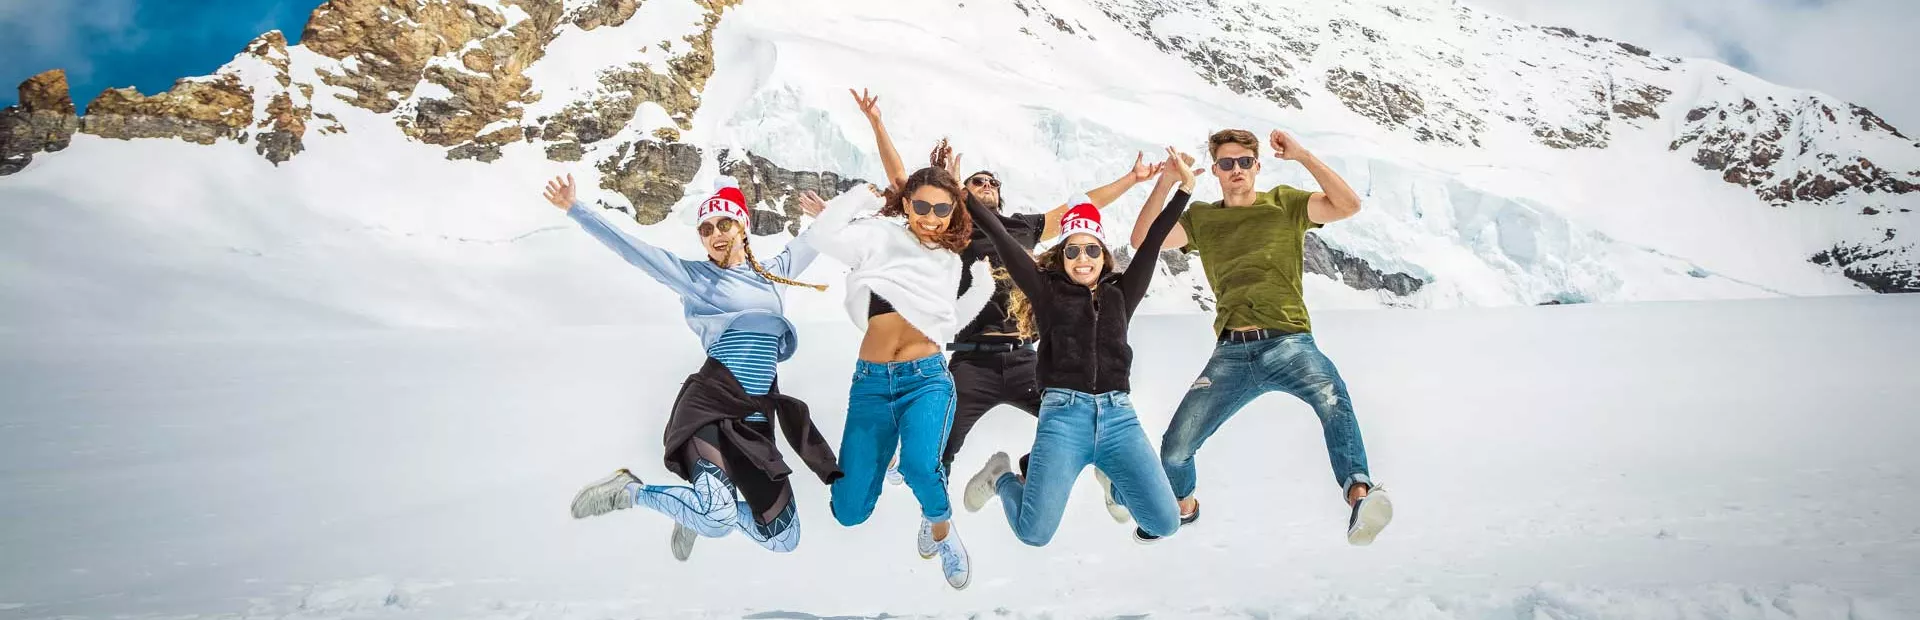 Group Jumping Together In The Snowy Mountains 0355EURS2019